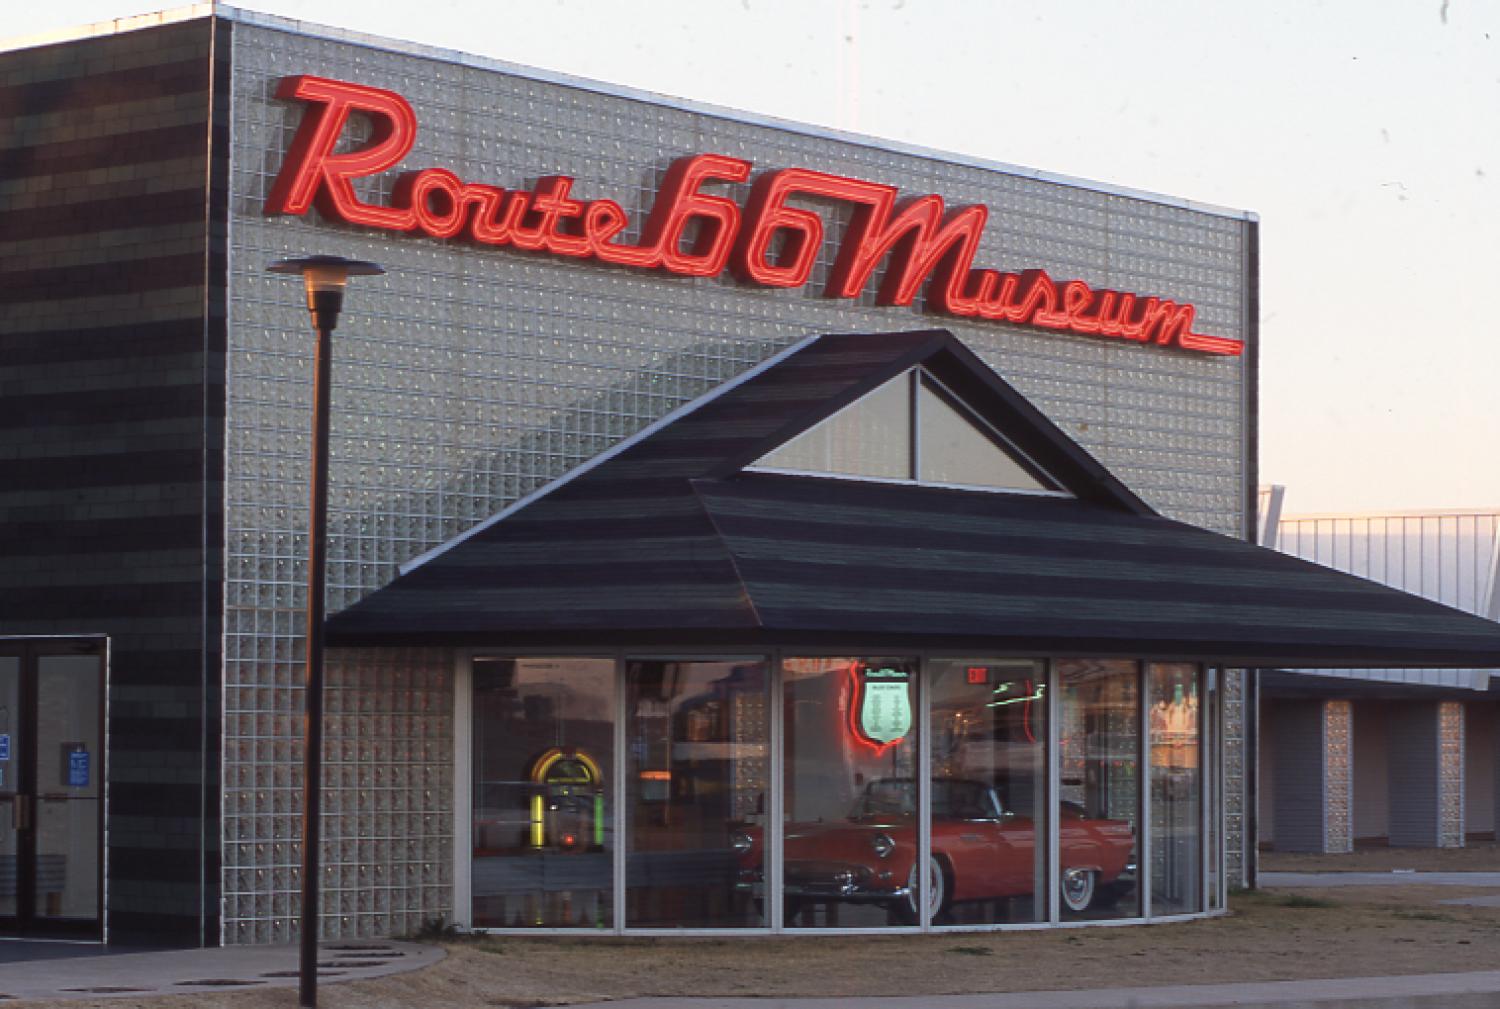 Located in the heart of Route 66 country, the Route 66 Museum in Clinton offers visitors a comprehensive look at the history and culture of America's most famous highway.]]>